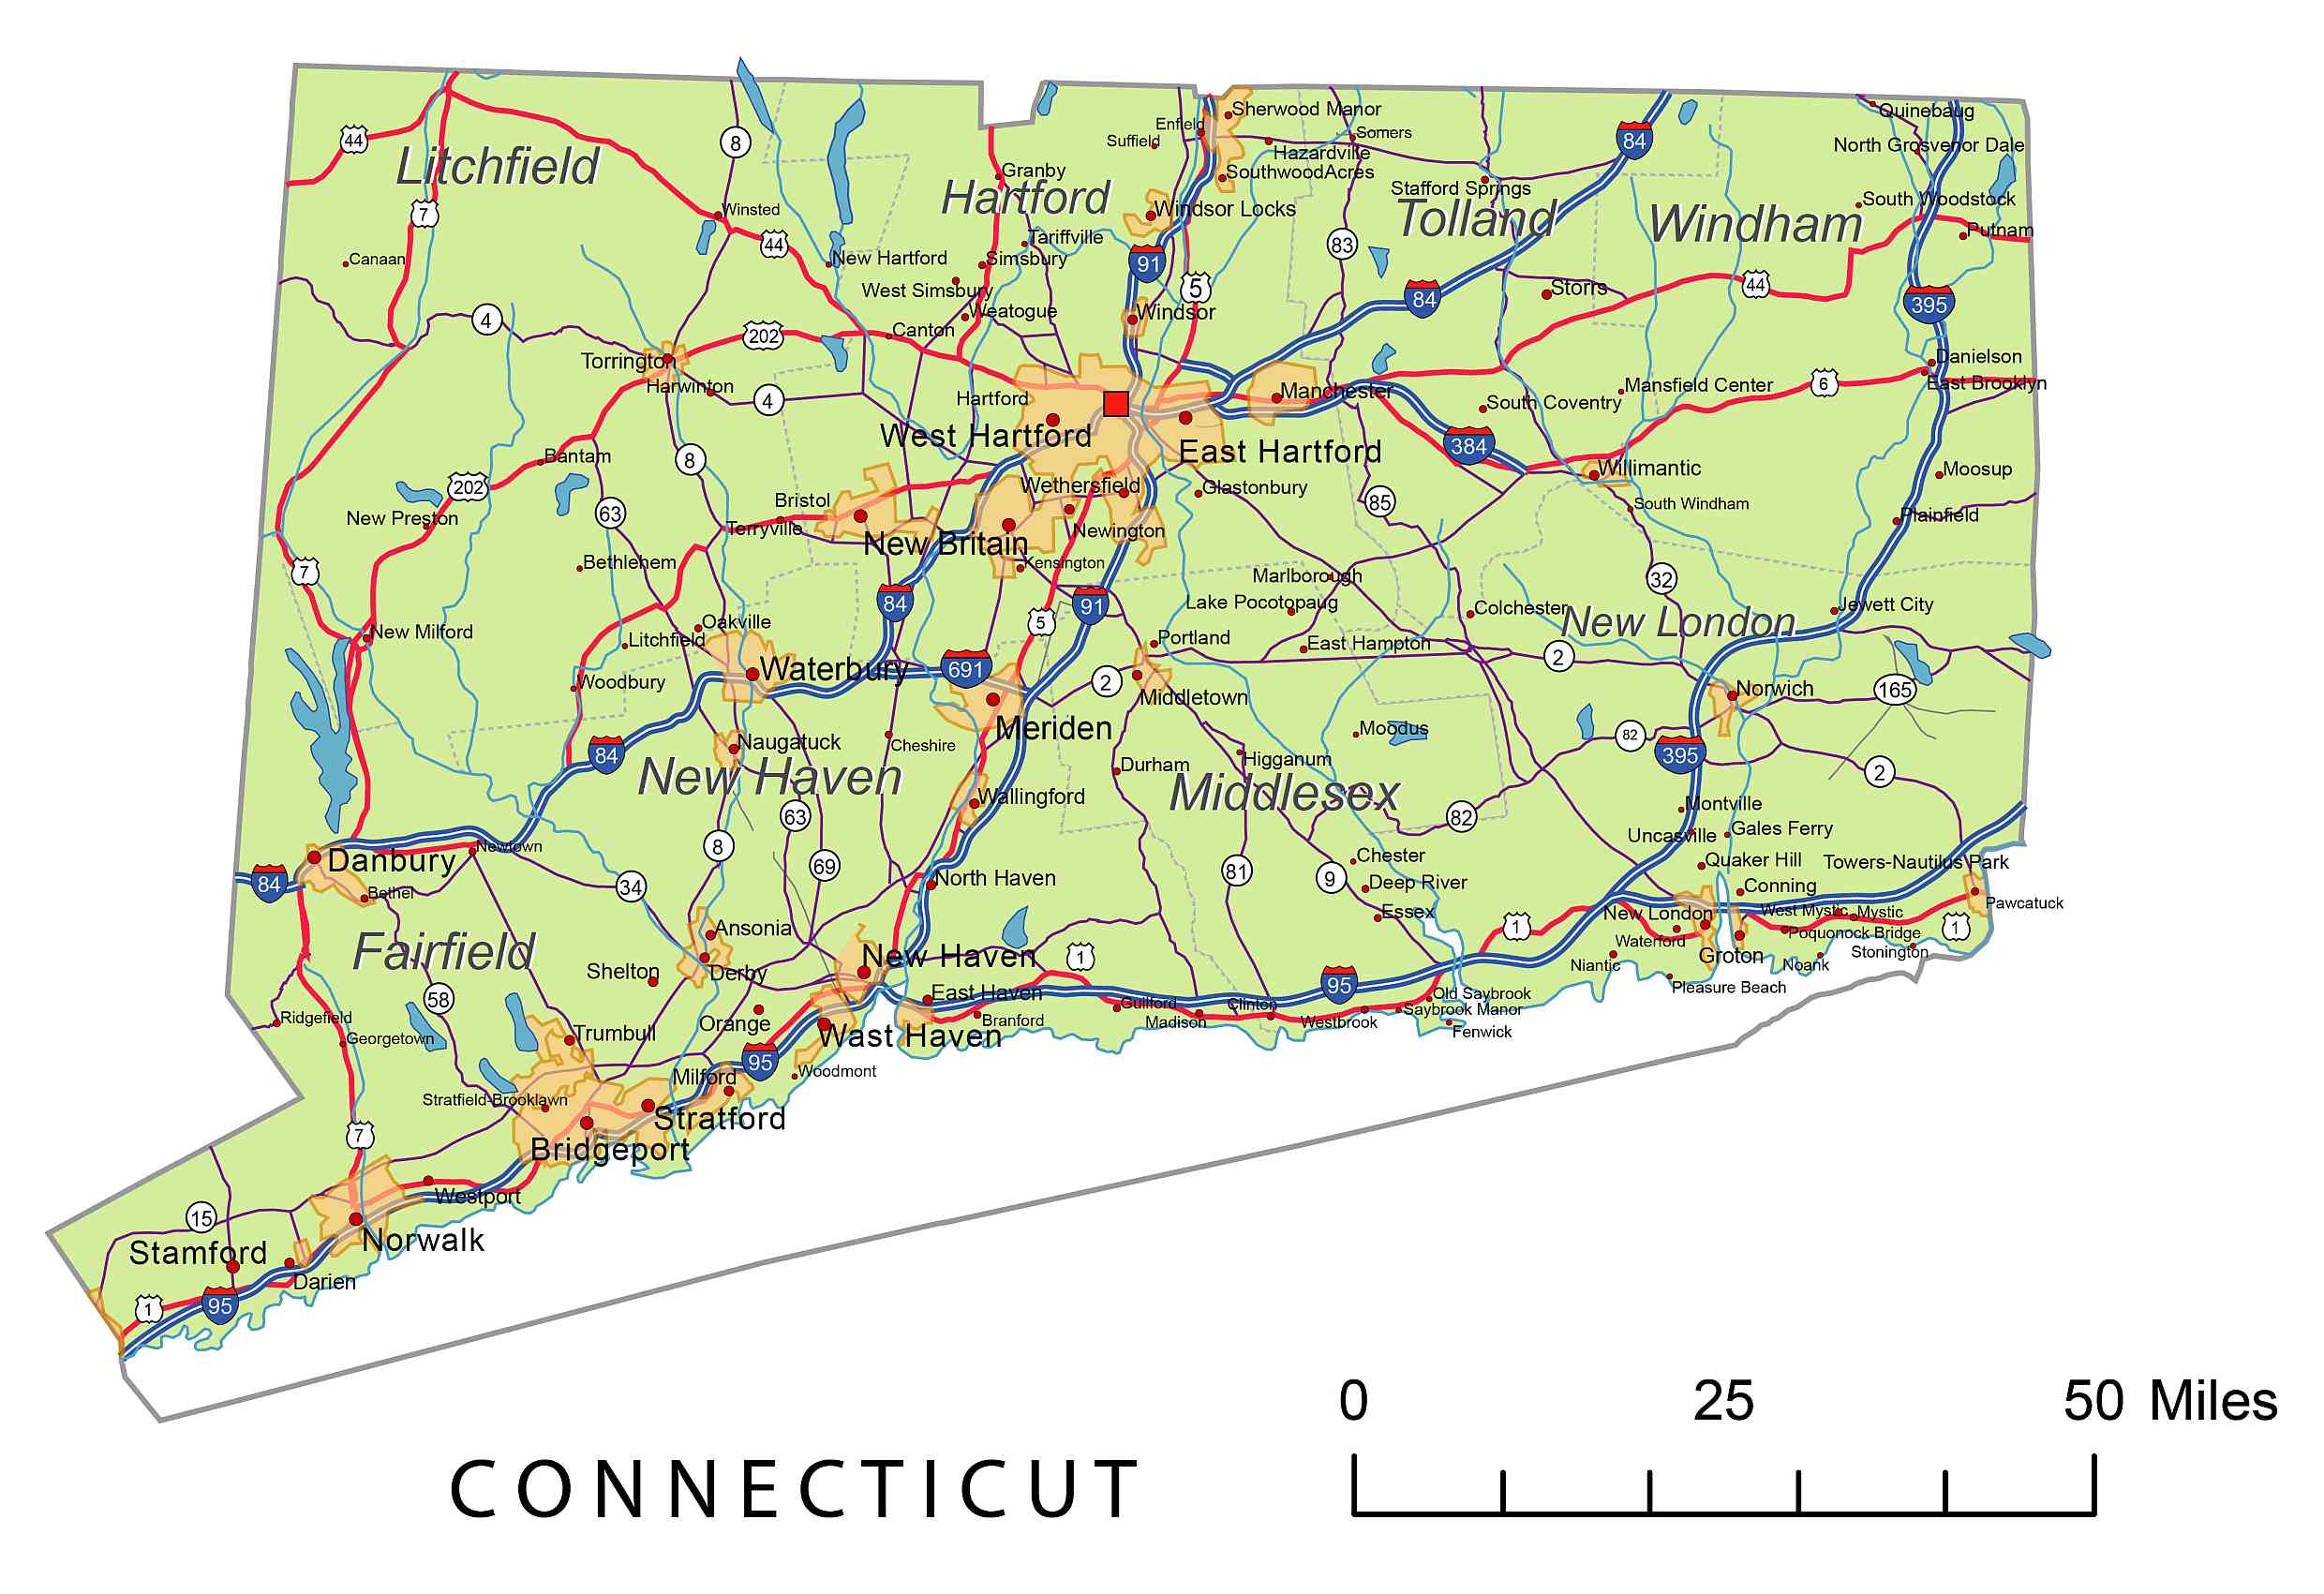 Preview Of Connecticut State Vector Road Map Your Vector Maps | Sexiz Pix